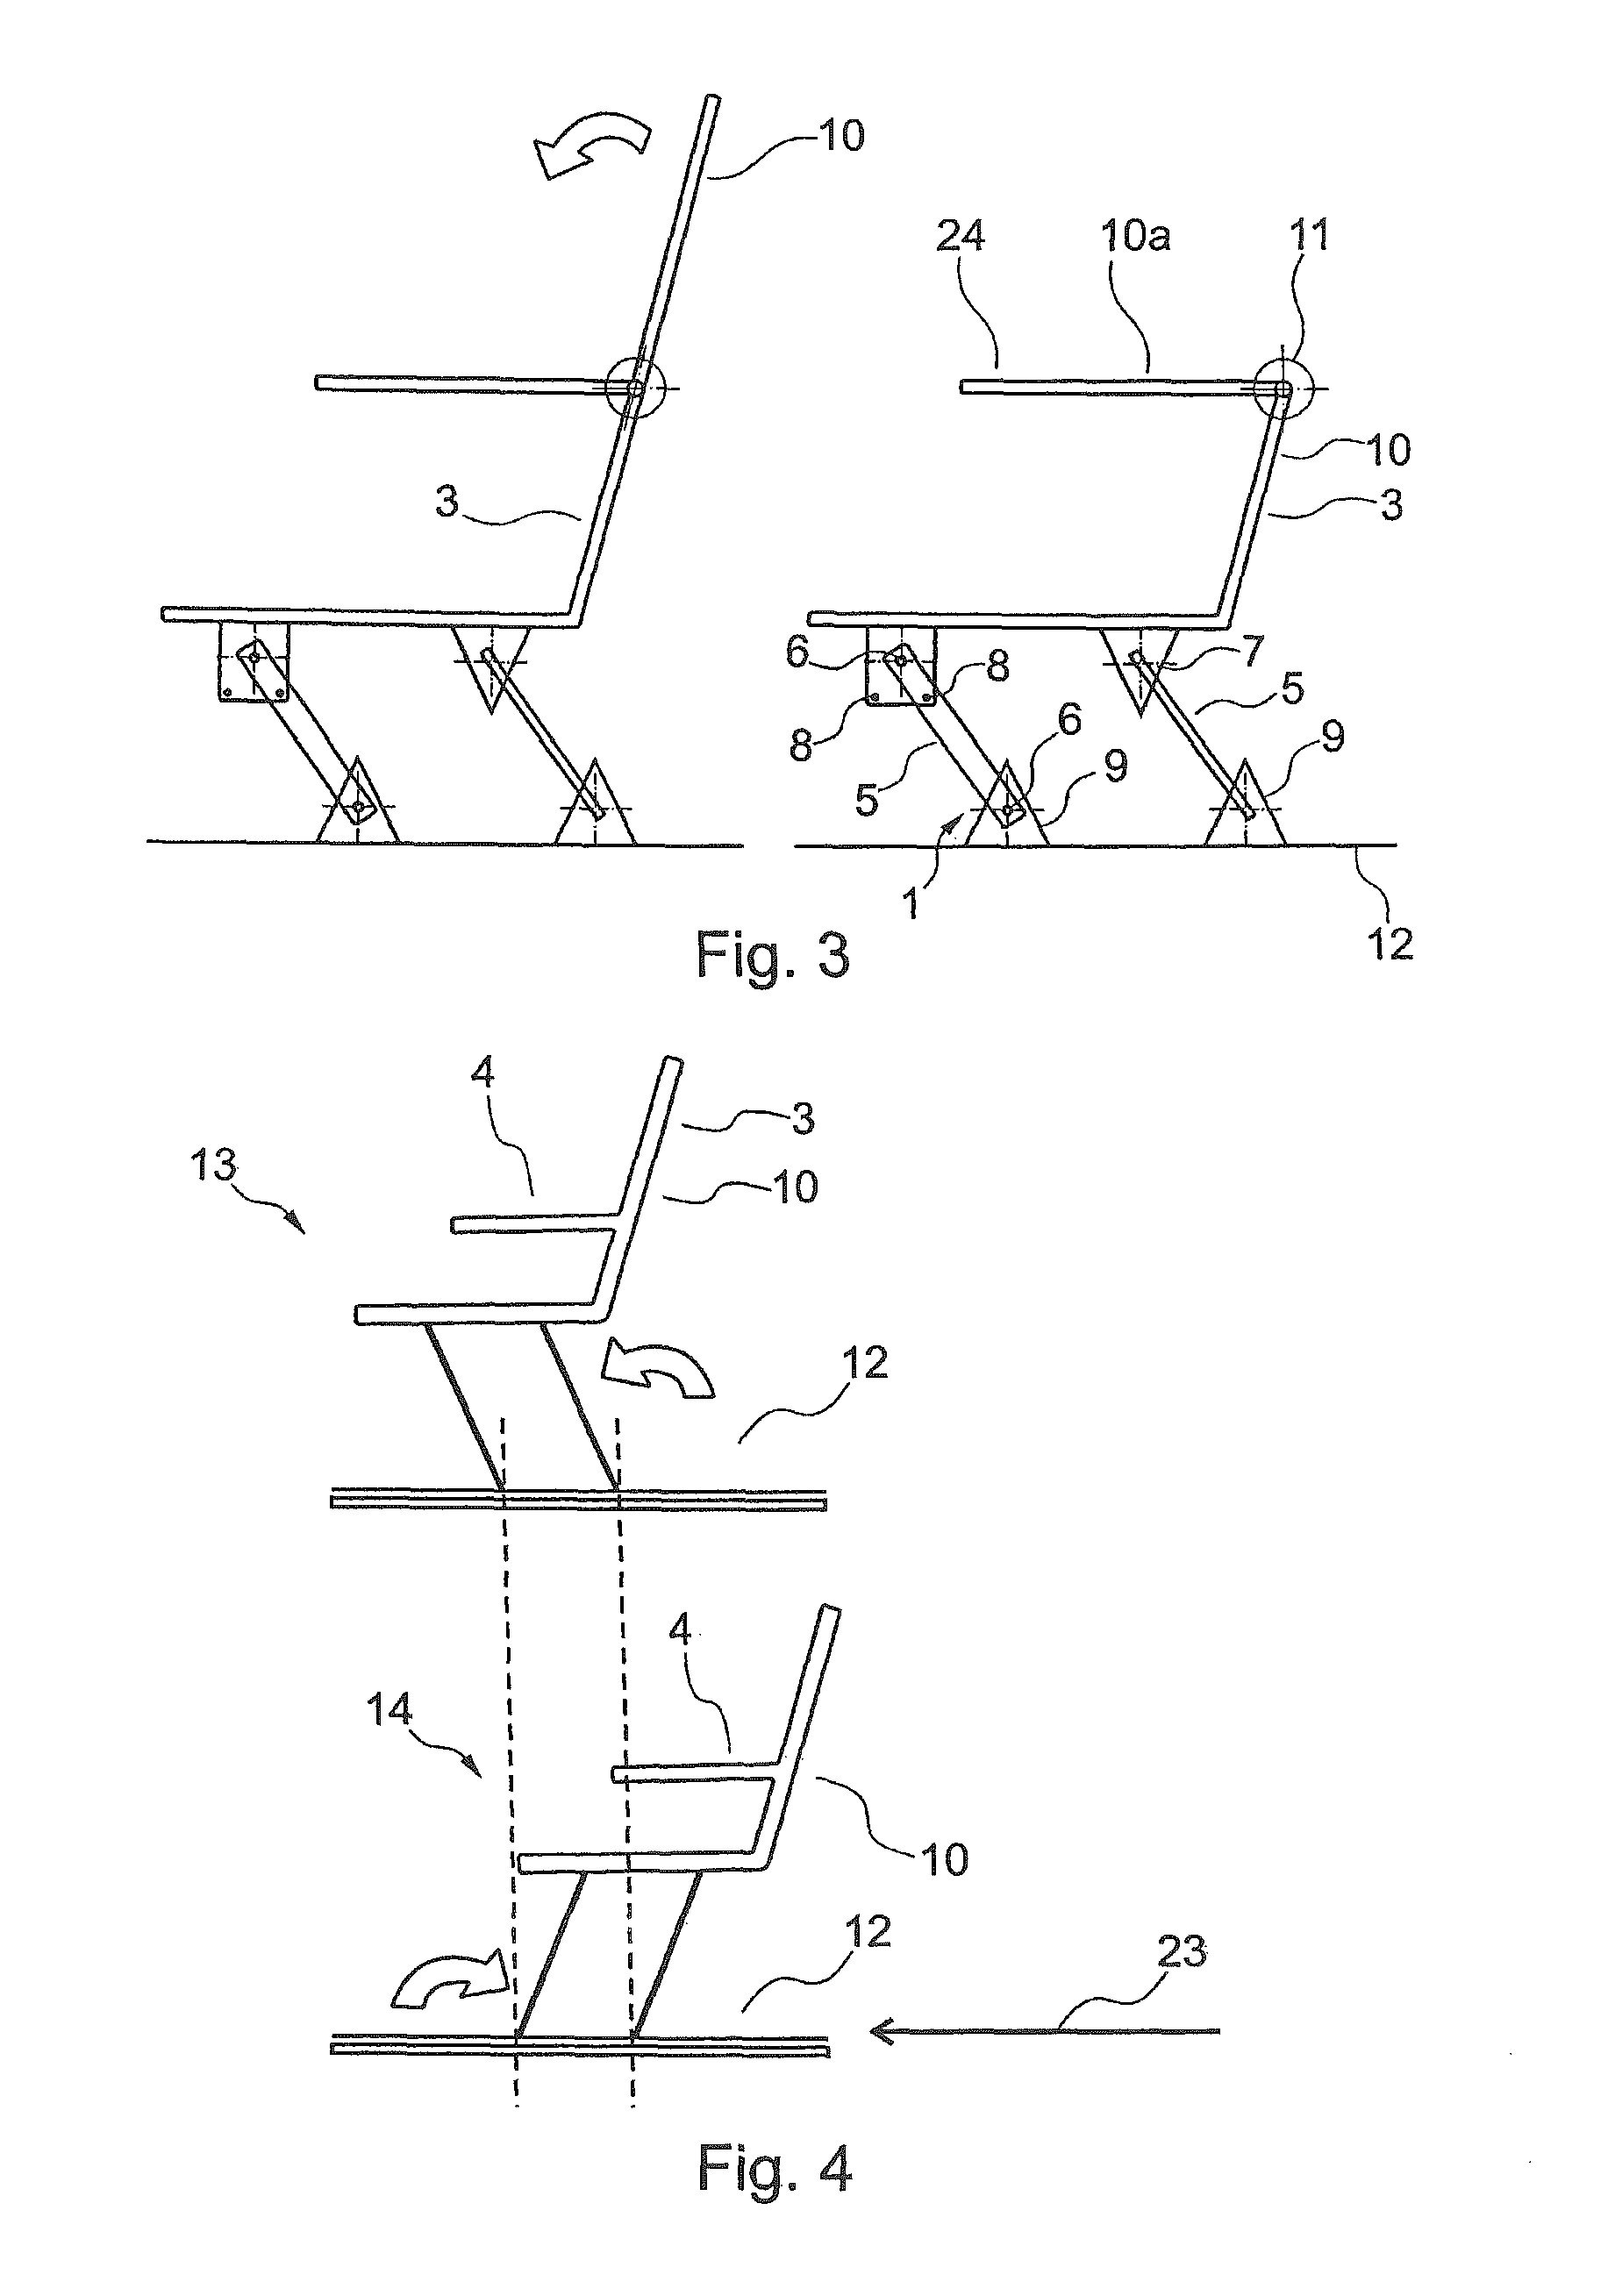 Movable fastening unit for a seat frame in an aircraft